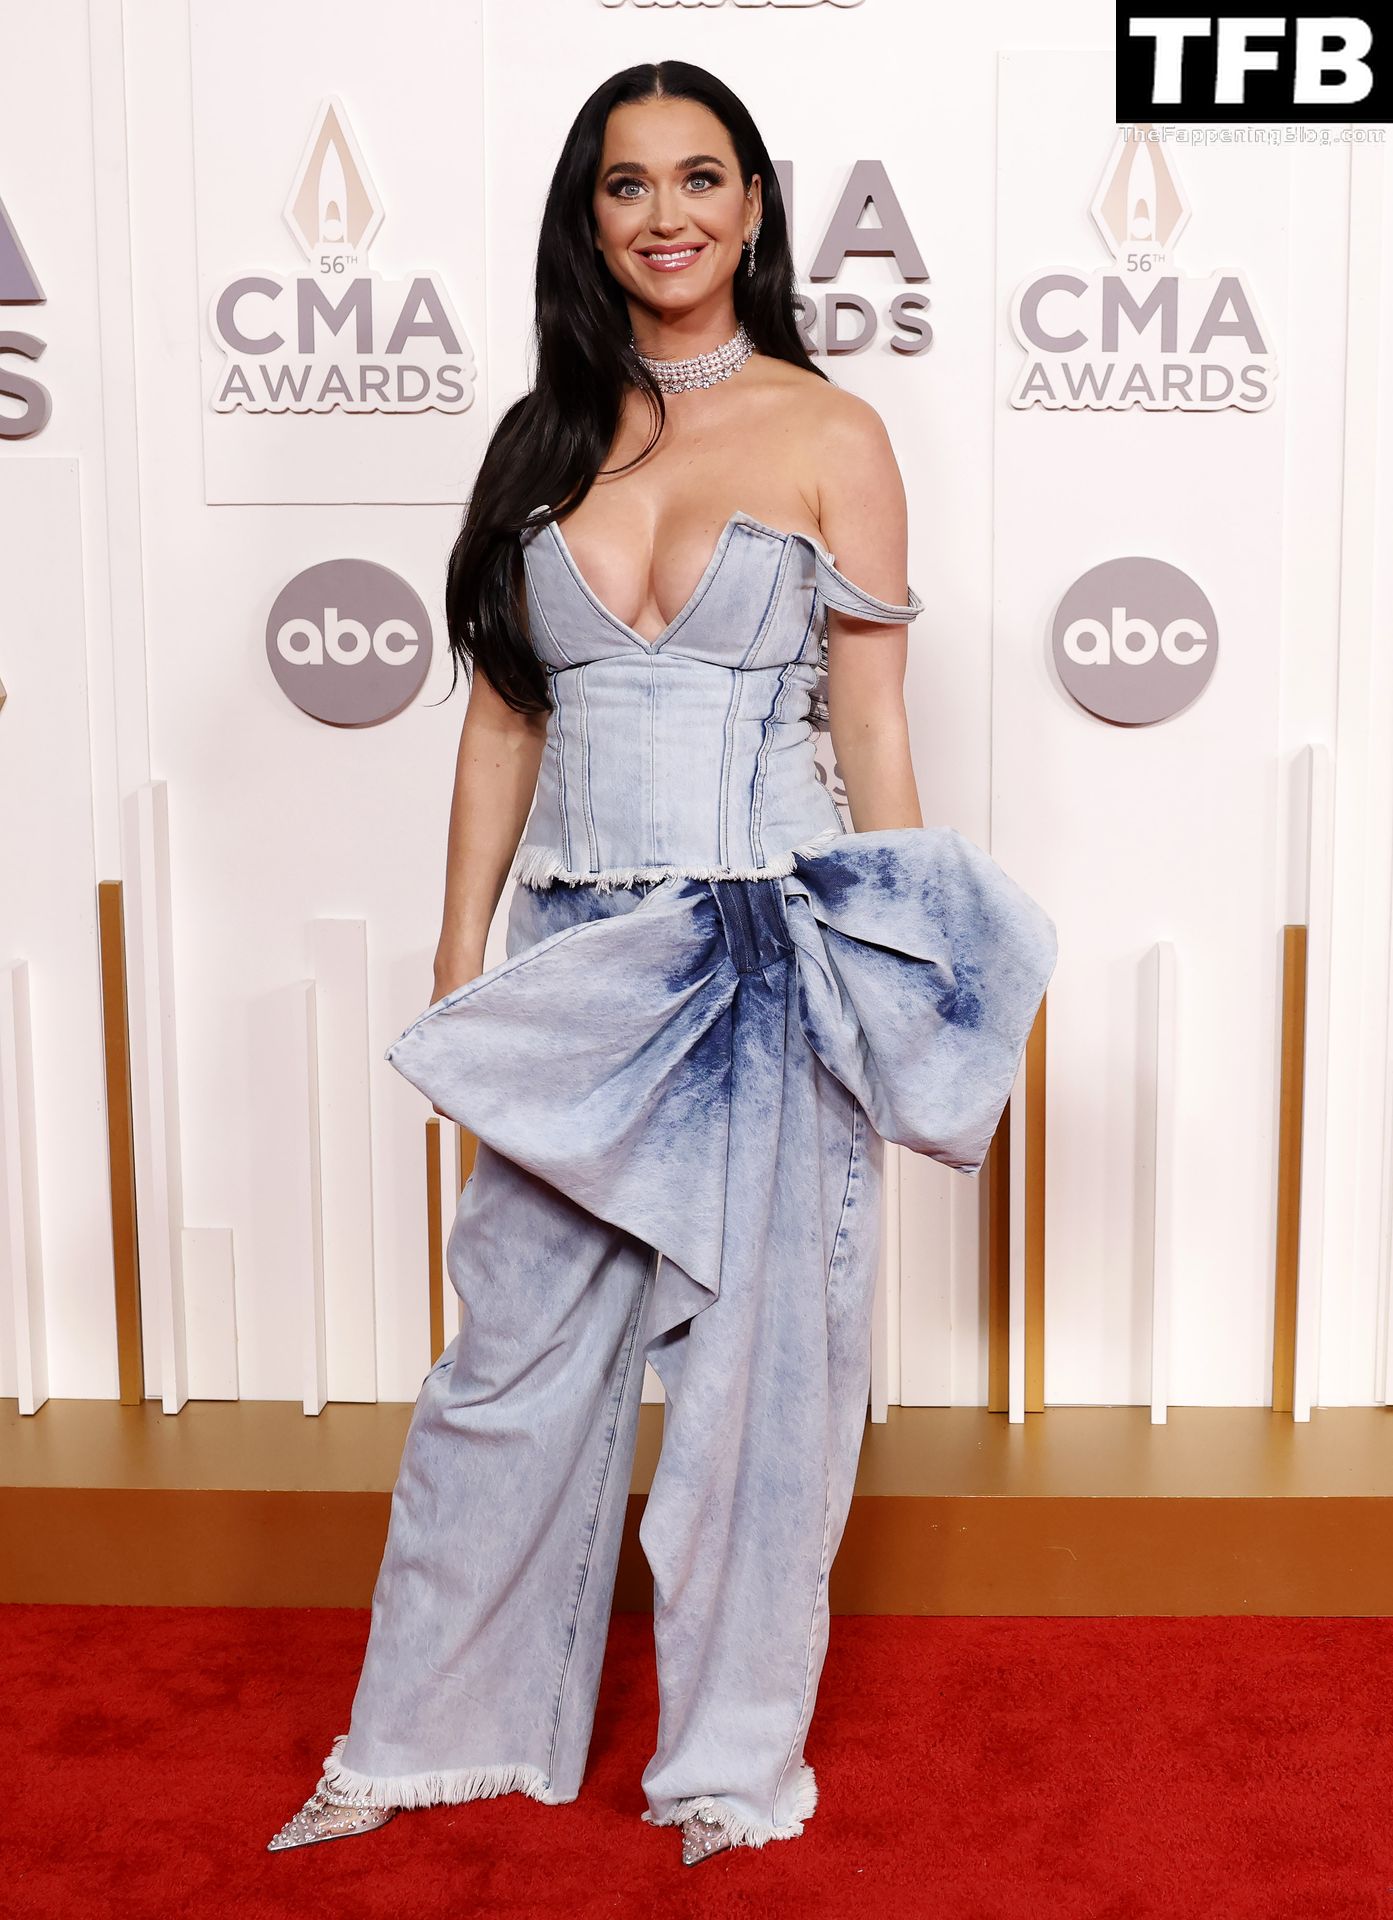 Katy Perry Sexy The Fappening Blog 3 - Katy Perry Shows Off Her Sexy Boobs at the 56th Annual CMA Awards (27 Photos)